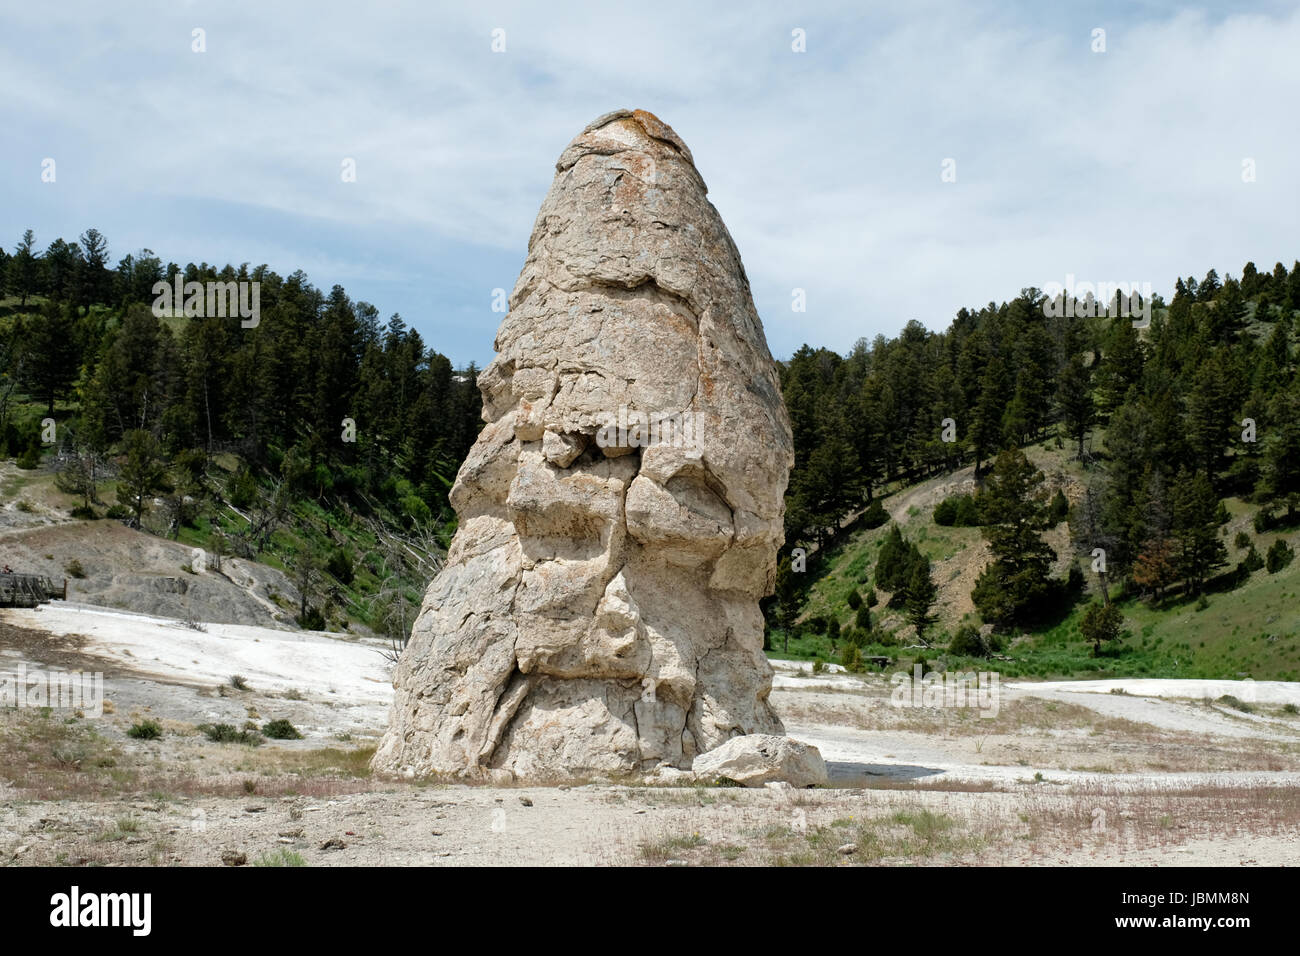 Liberty Cap Hot spring cone situé au Mammoth Hot Springs dans le Parc National de Yellowstone, Wyoming, USA. Banque D'Images